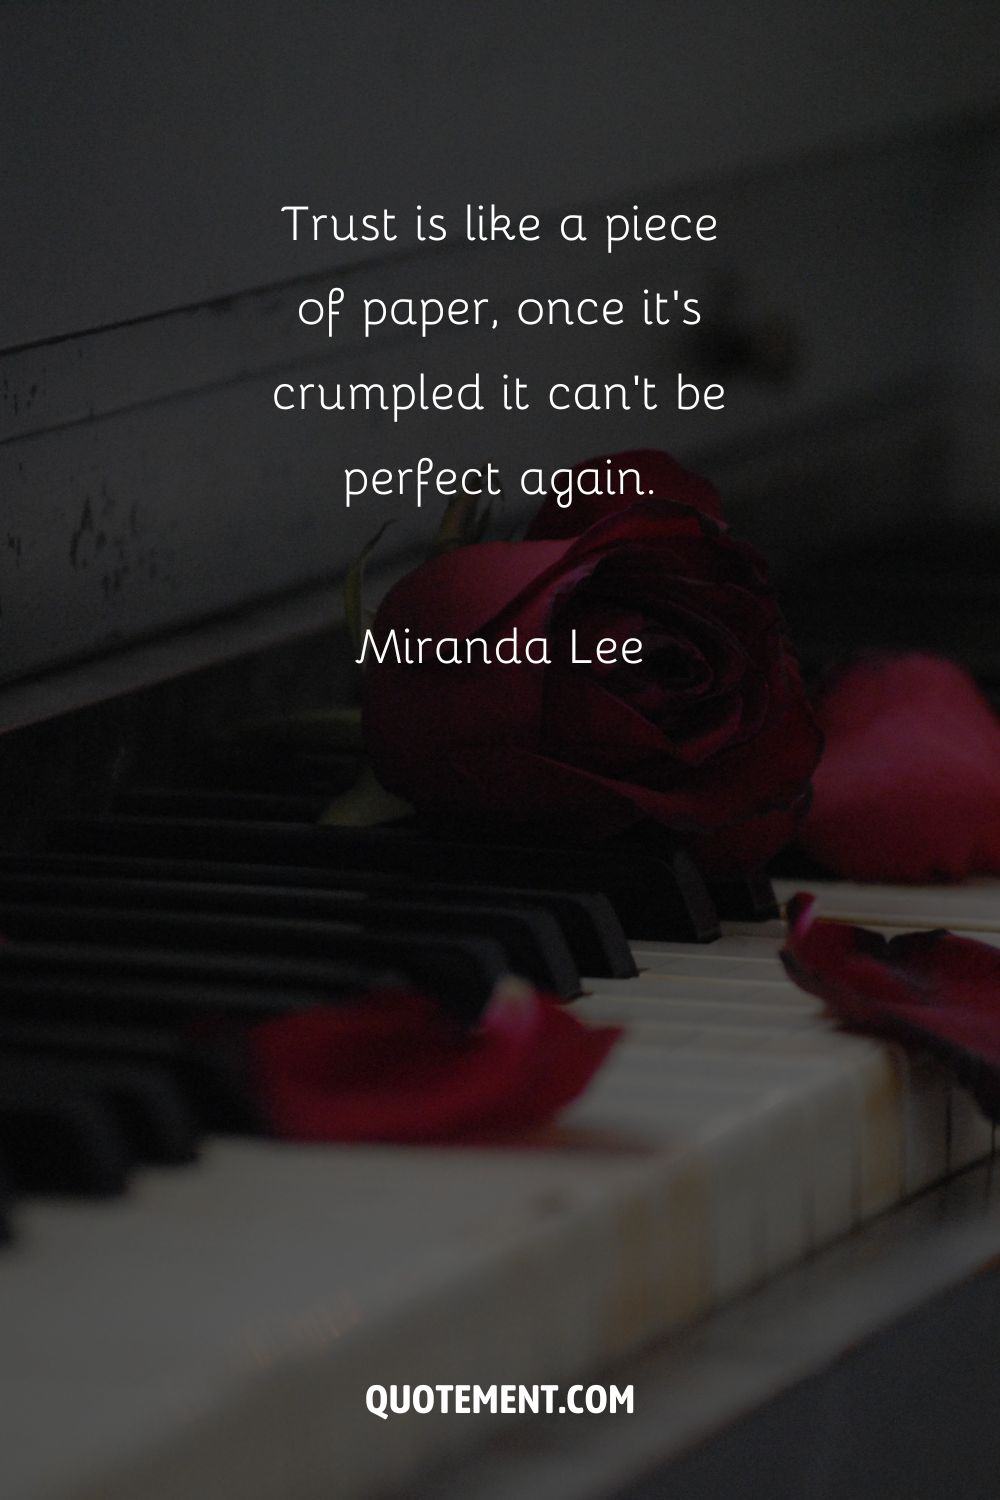 “Trust is like a piece of paper, once it’s crumpled it can’t be perfect again.”